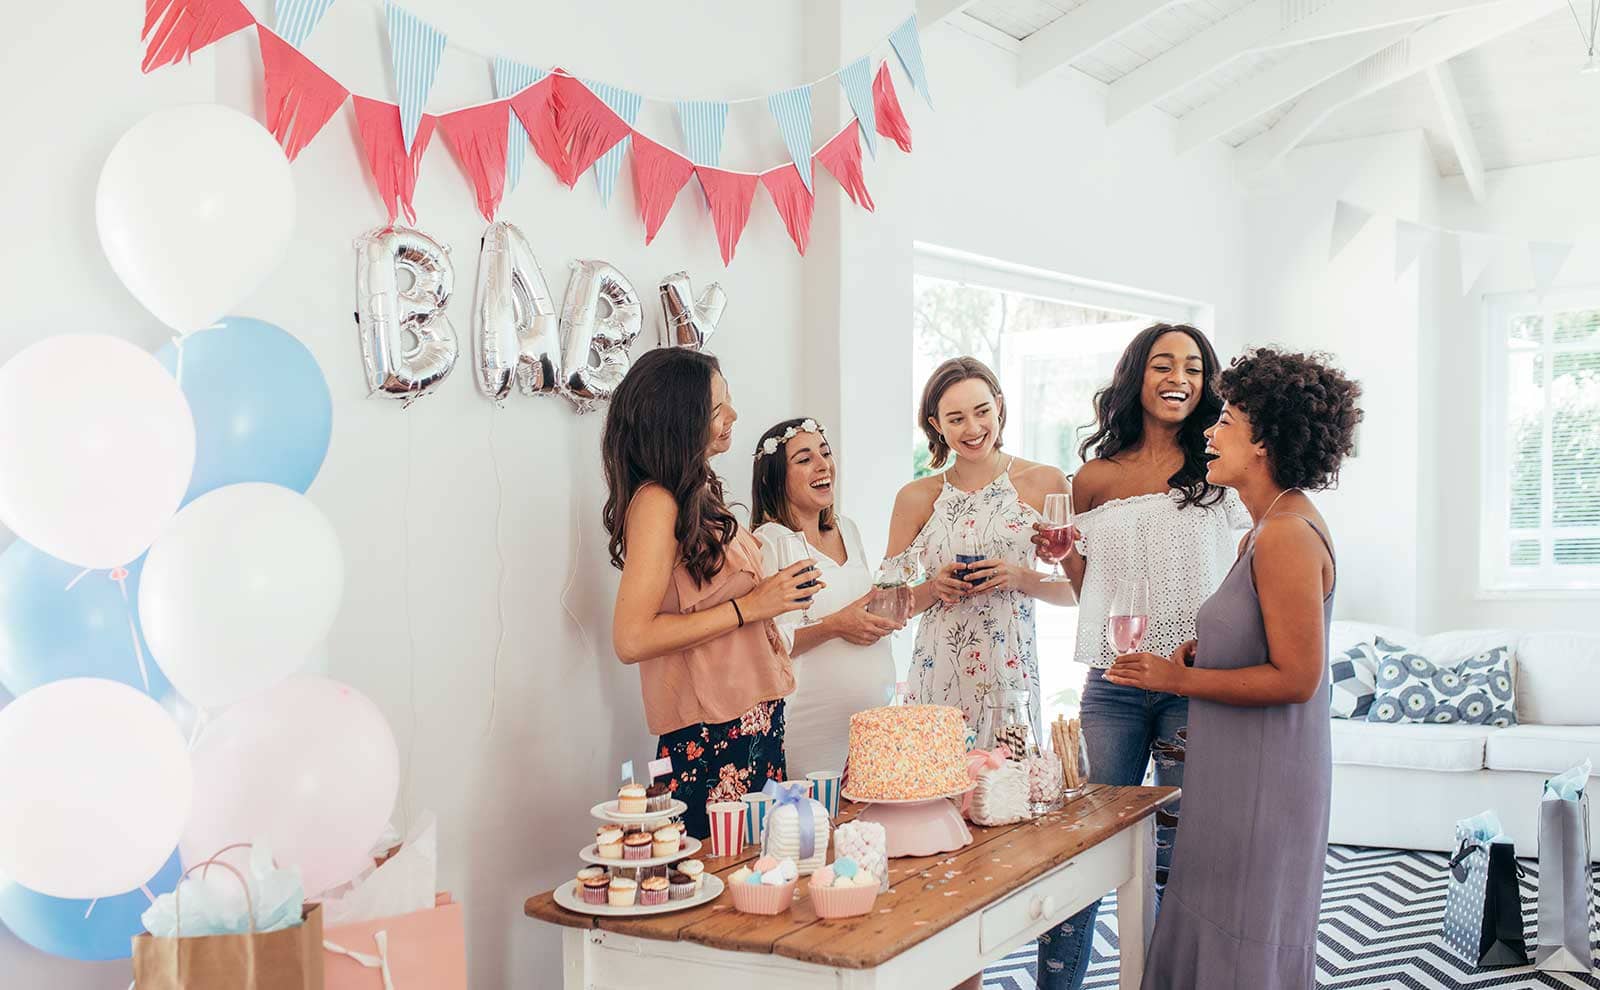 What to Wear to a Baby Shower, According to Experts